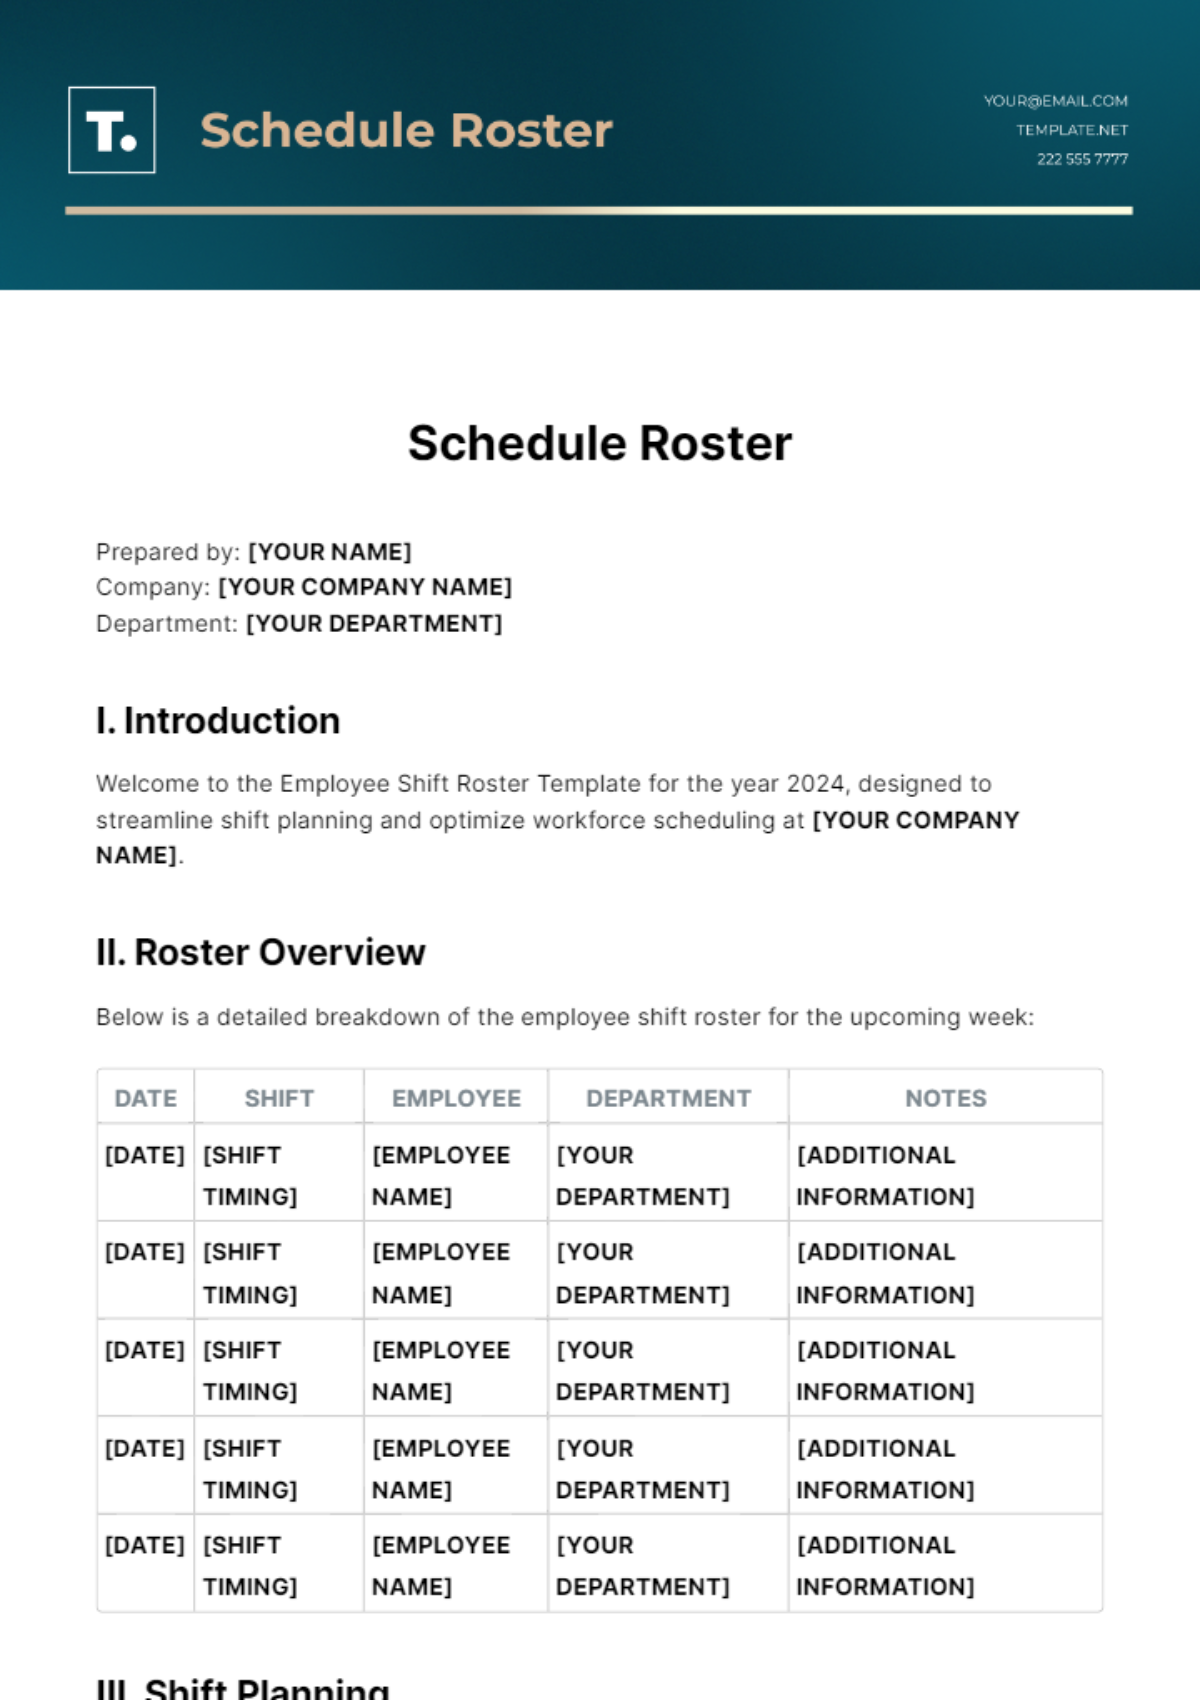 Free Schedule Roster Template